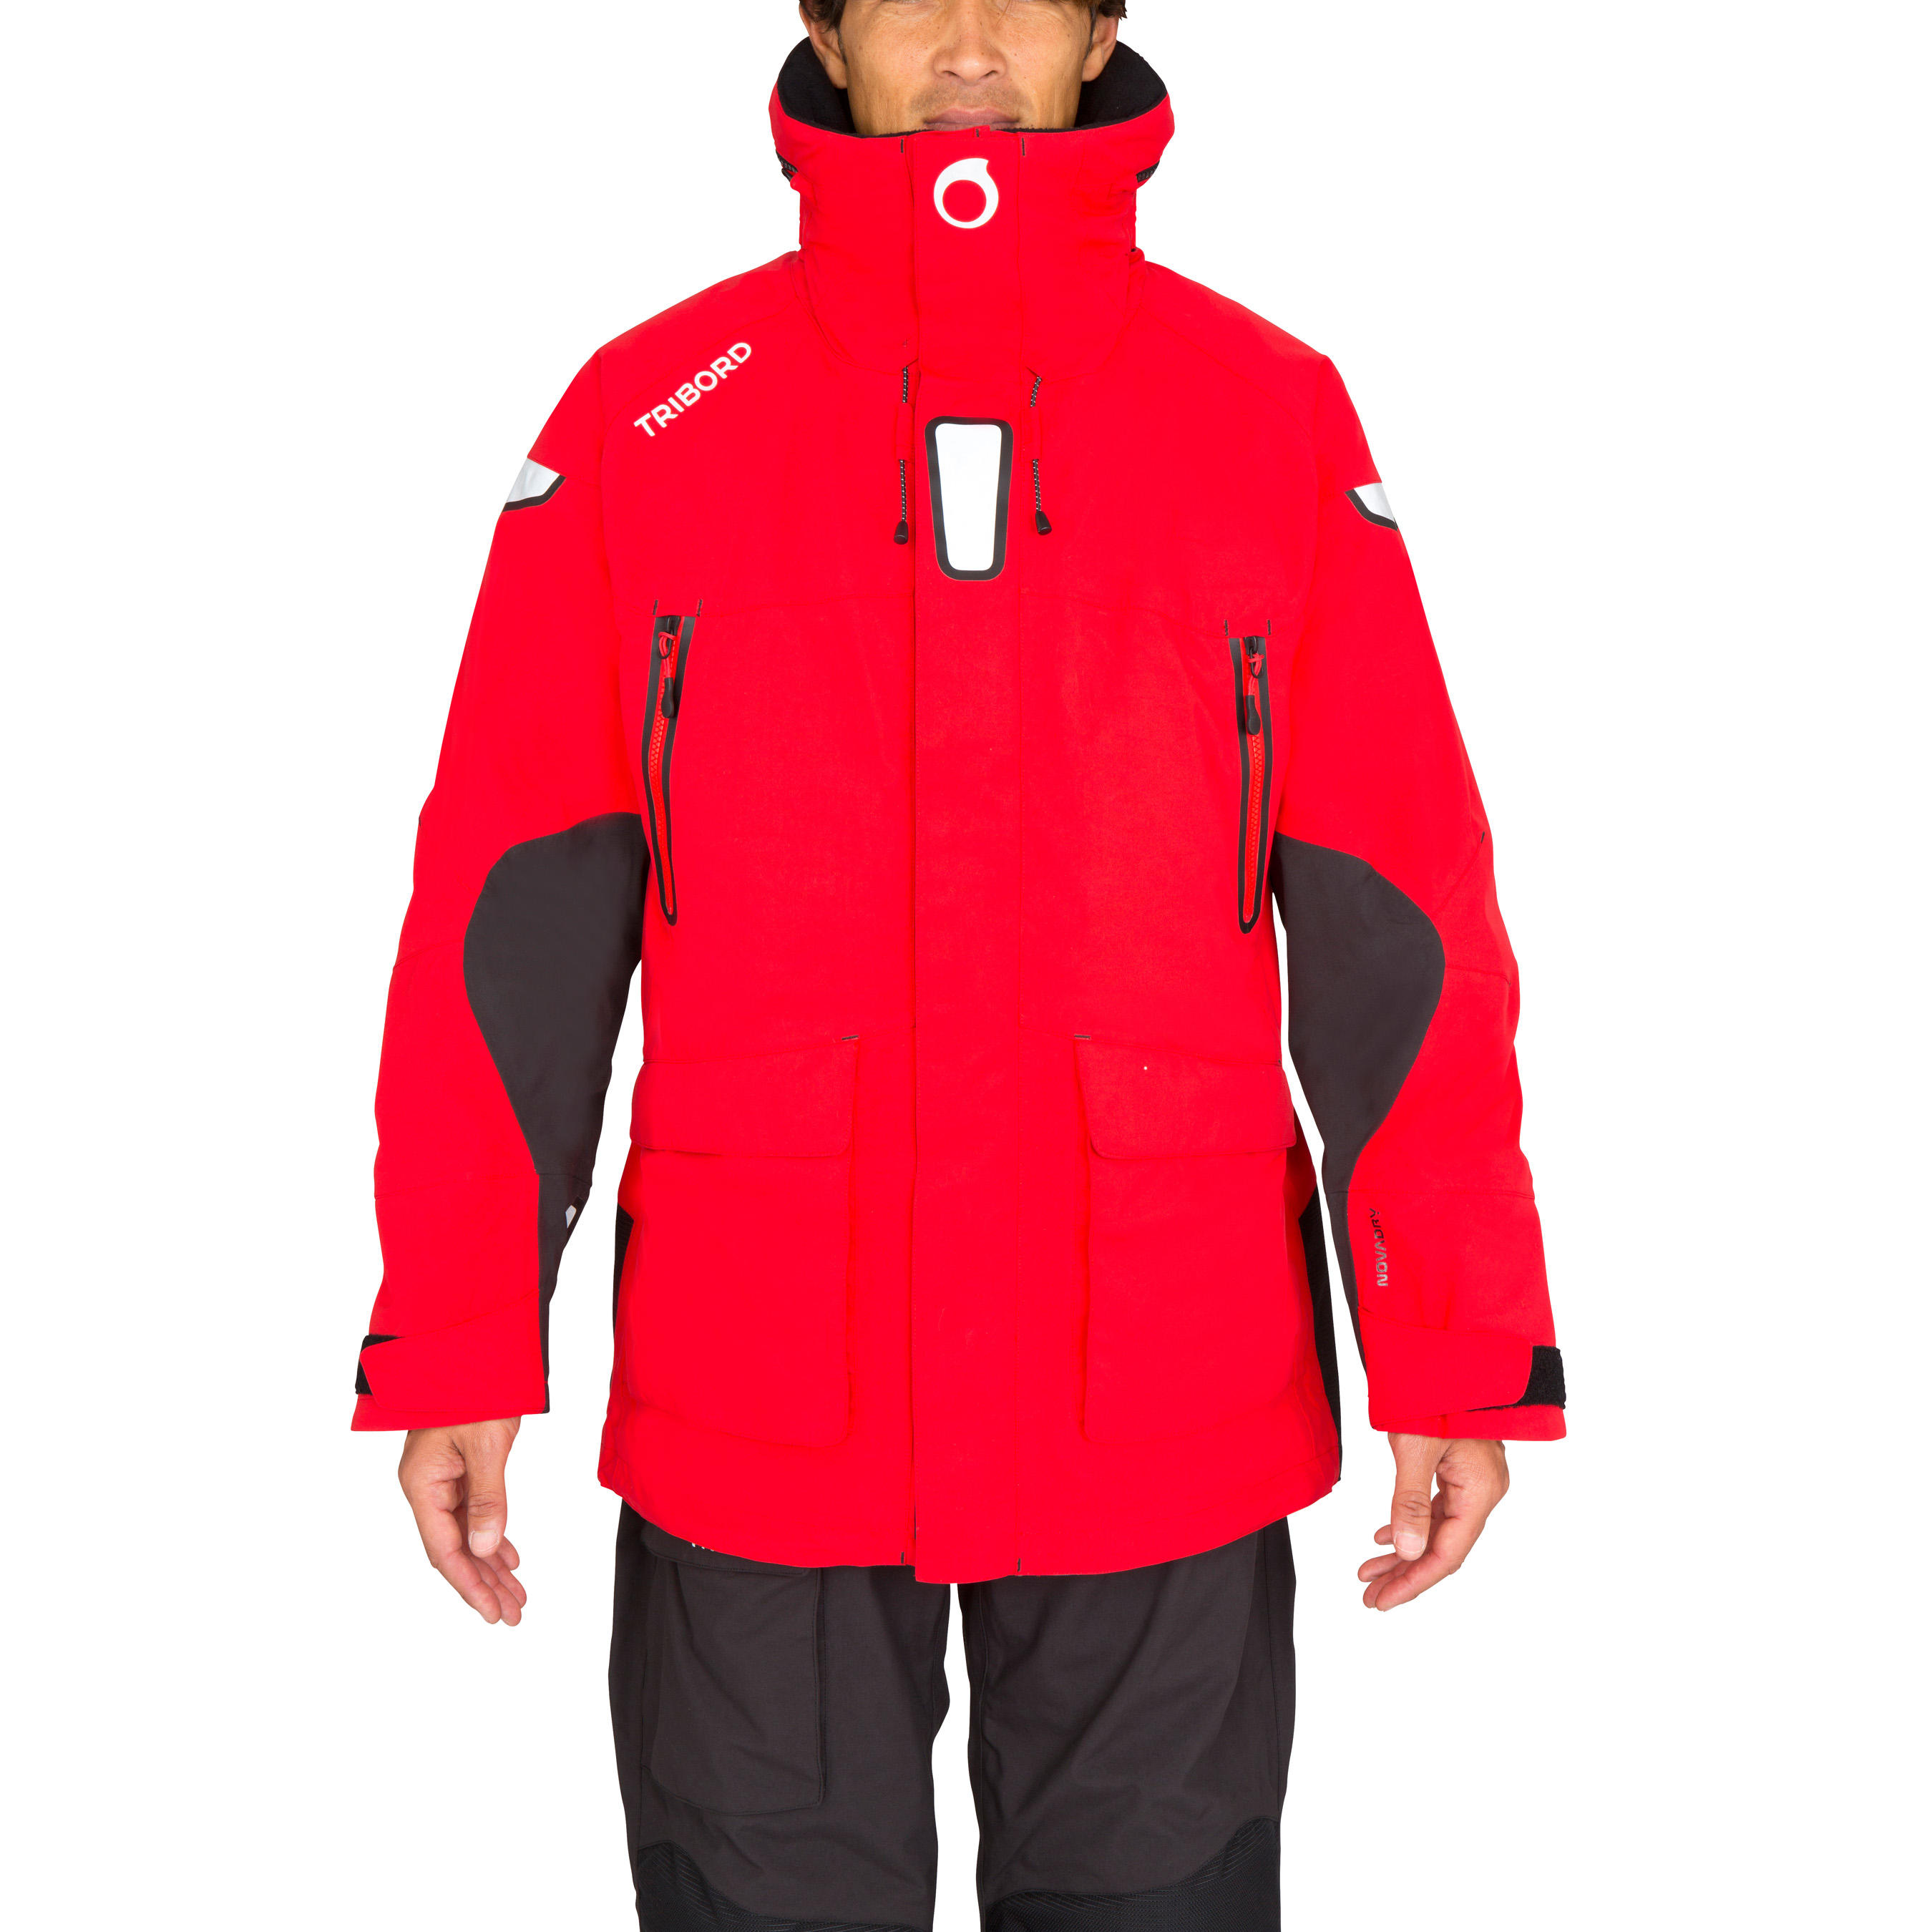 Ozean 900 Men's Waterproof and Breathable Sailing Jacket - Red 3/44